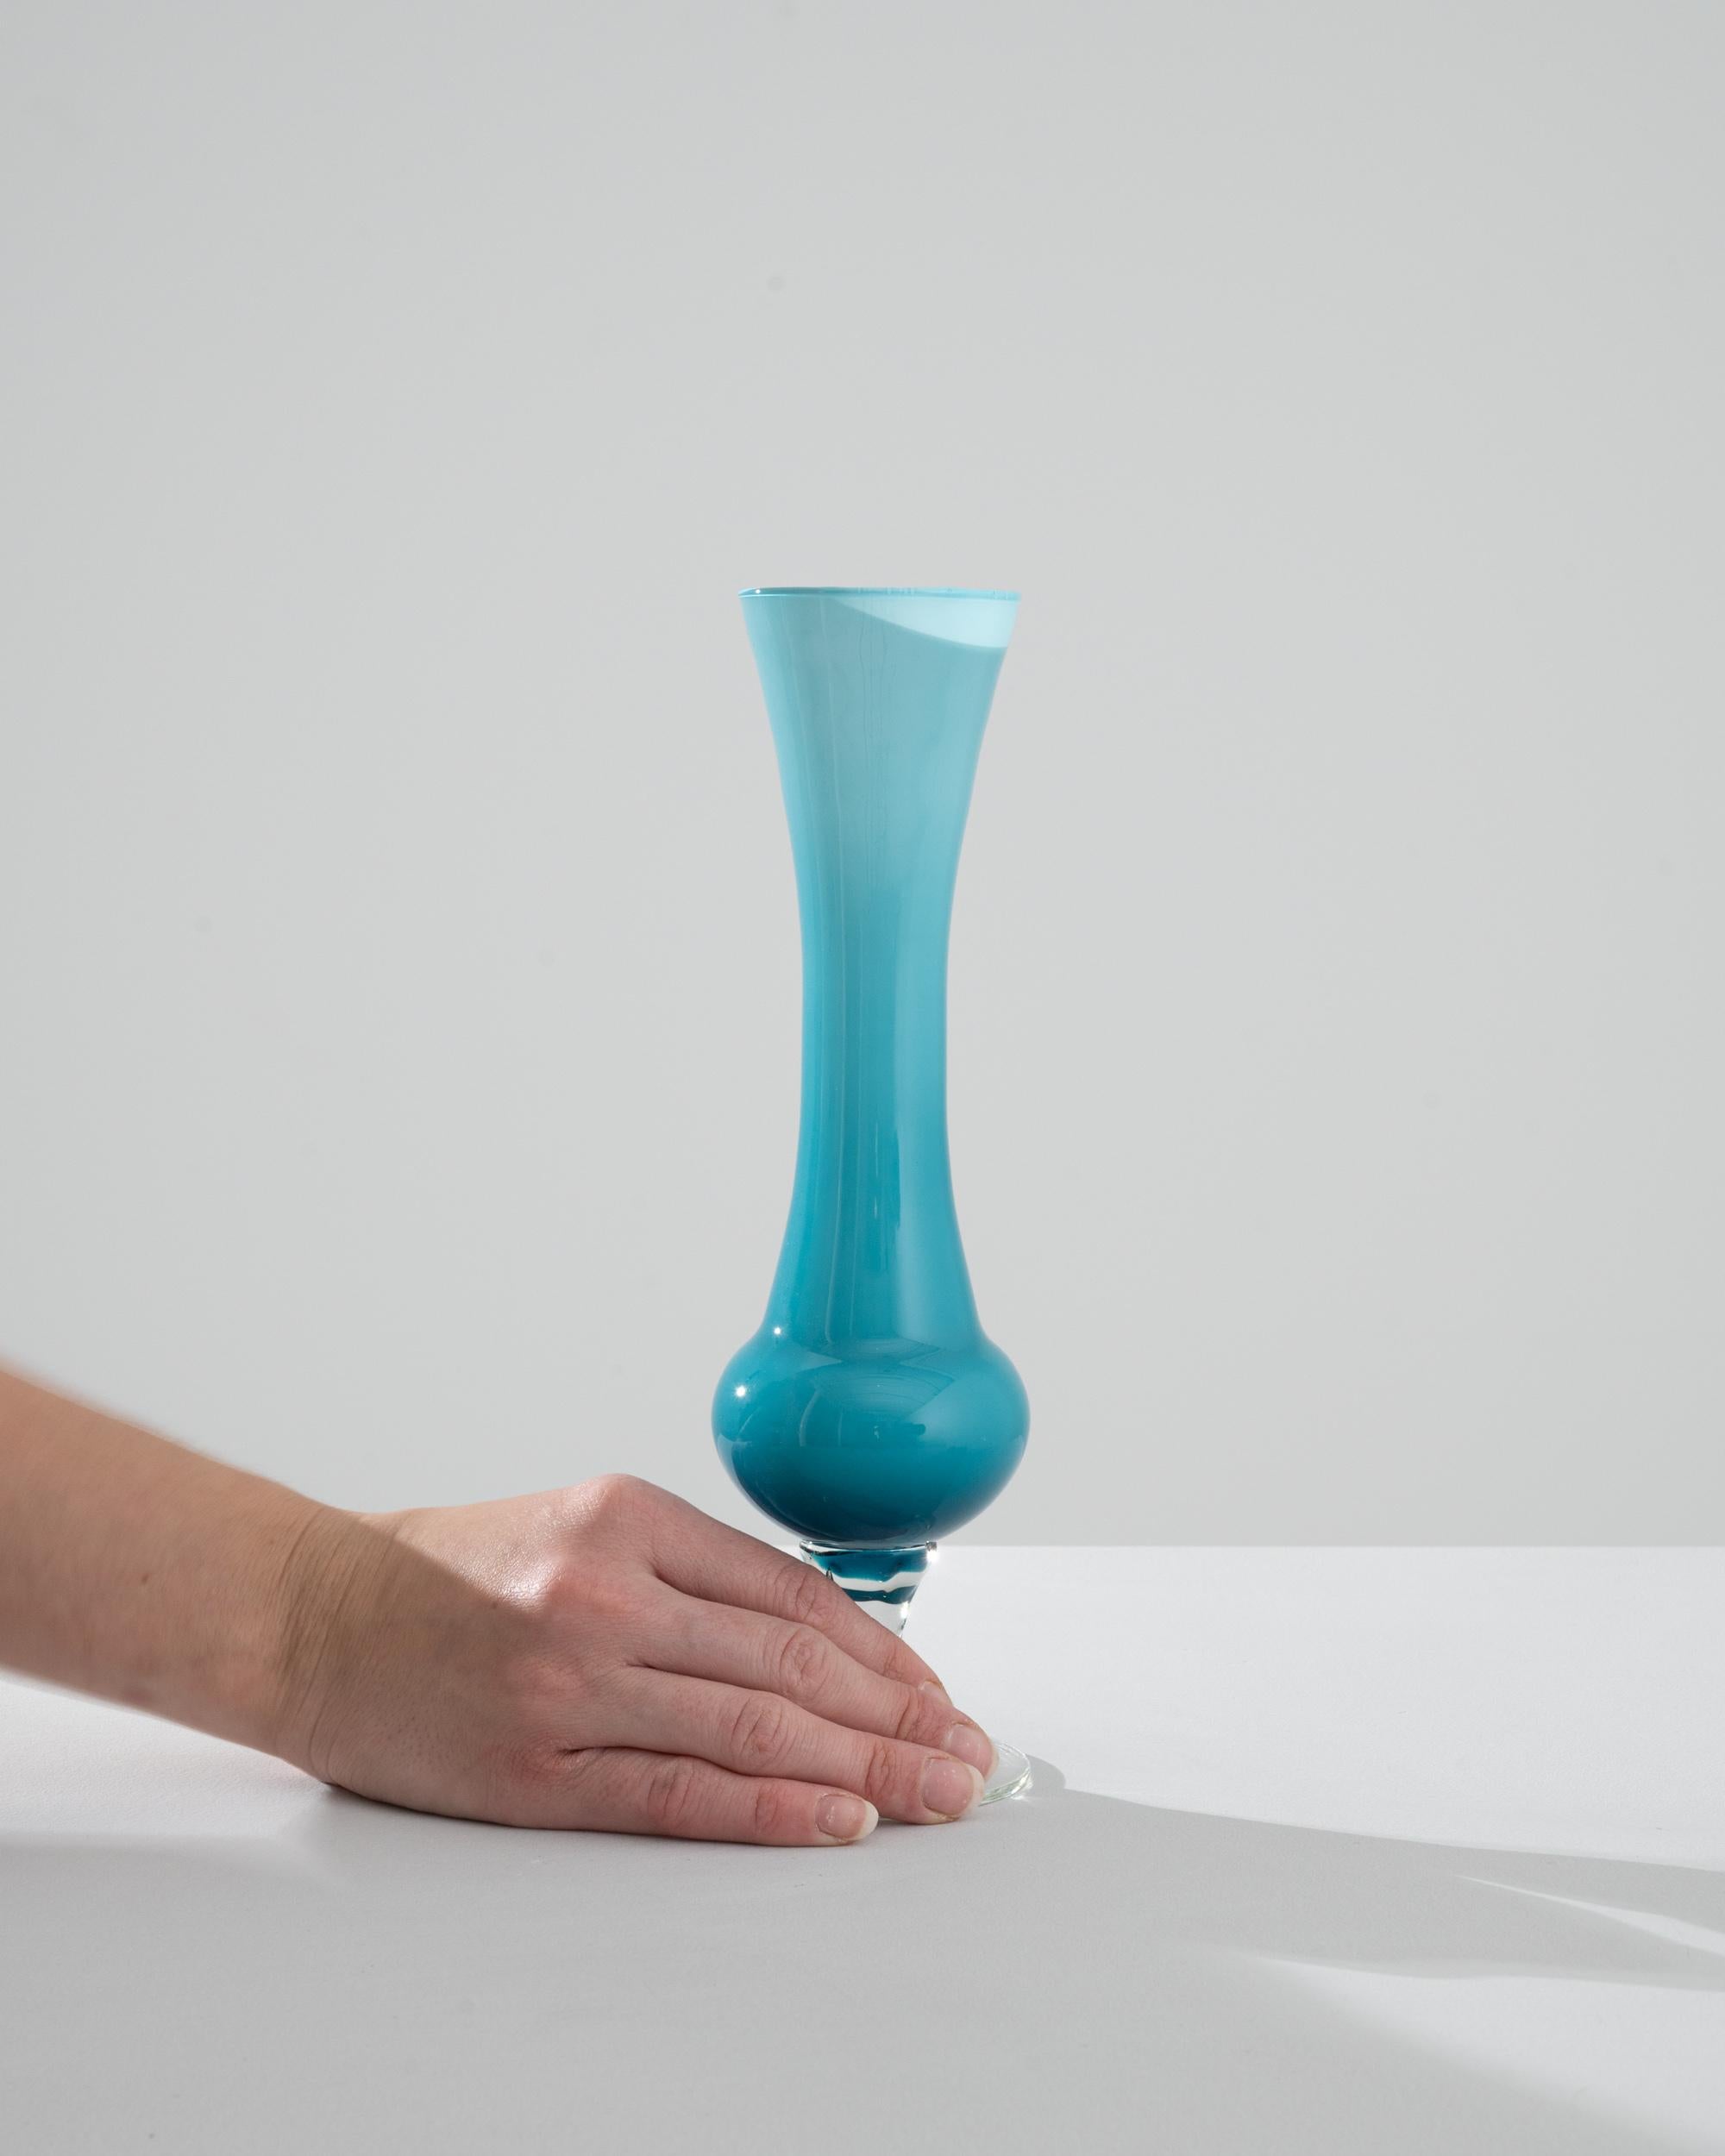 Discover the enchantment of Italian design with this captivating 1960s Italian Blue Glass Vase, a showcase of the era's passion for bold, flowing forms and vibrant colors. The vase's alluring sky blue color palette radiates tranquility, while its